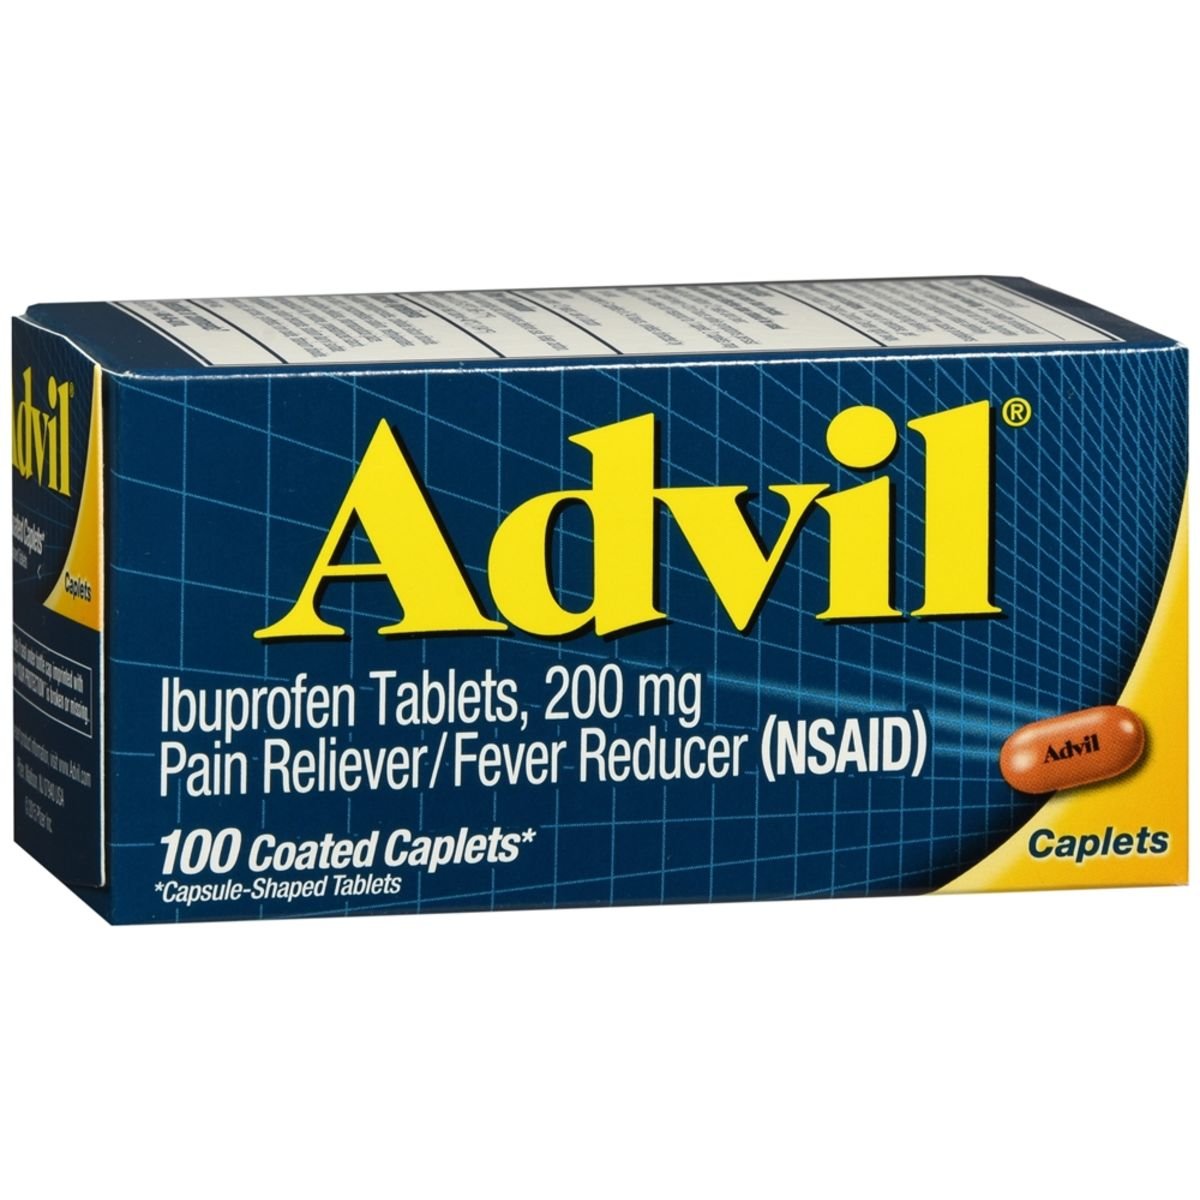 Advil | Medcare | Wholesale company for beauty and personal care